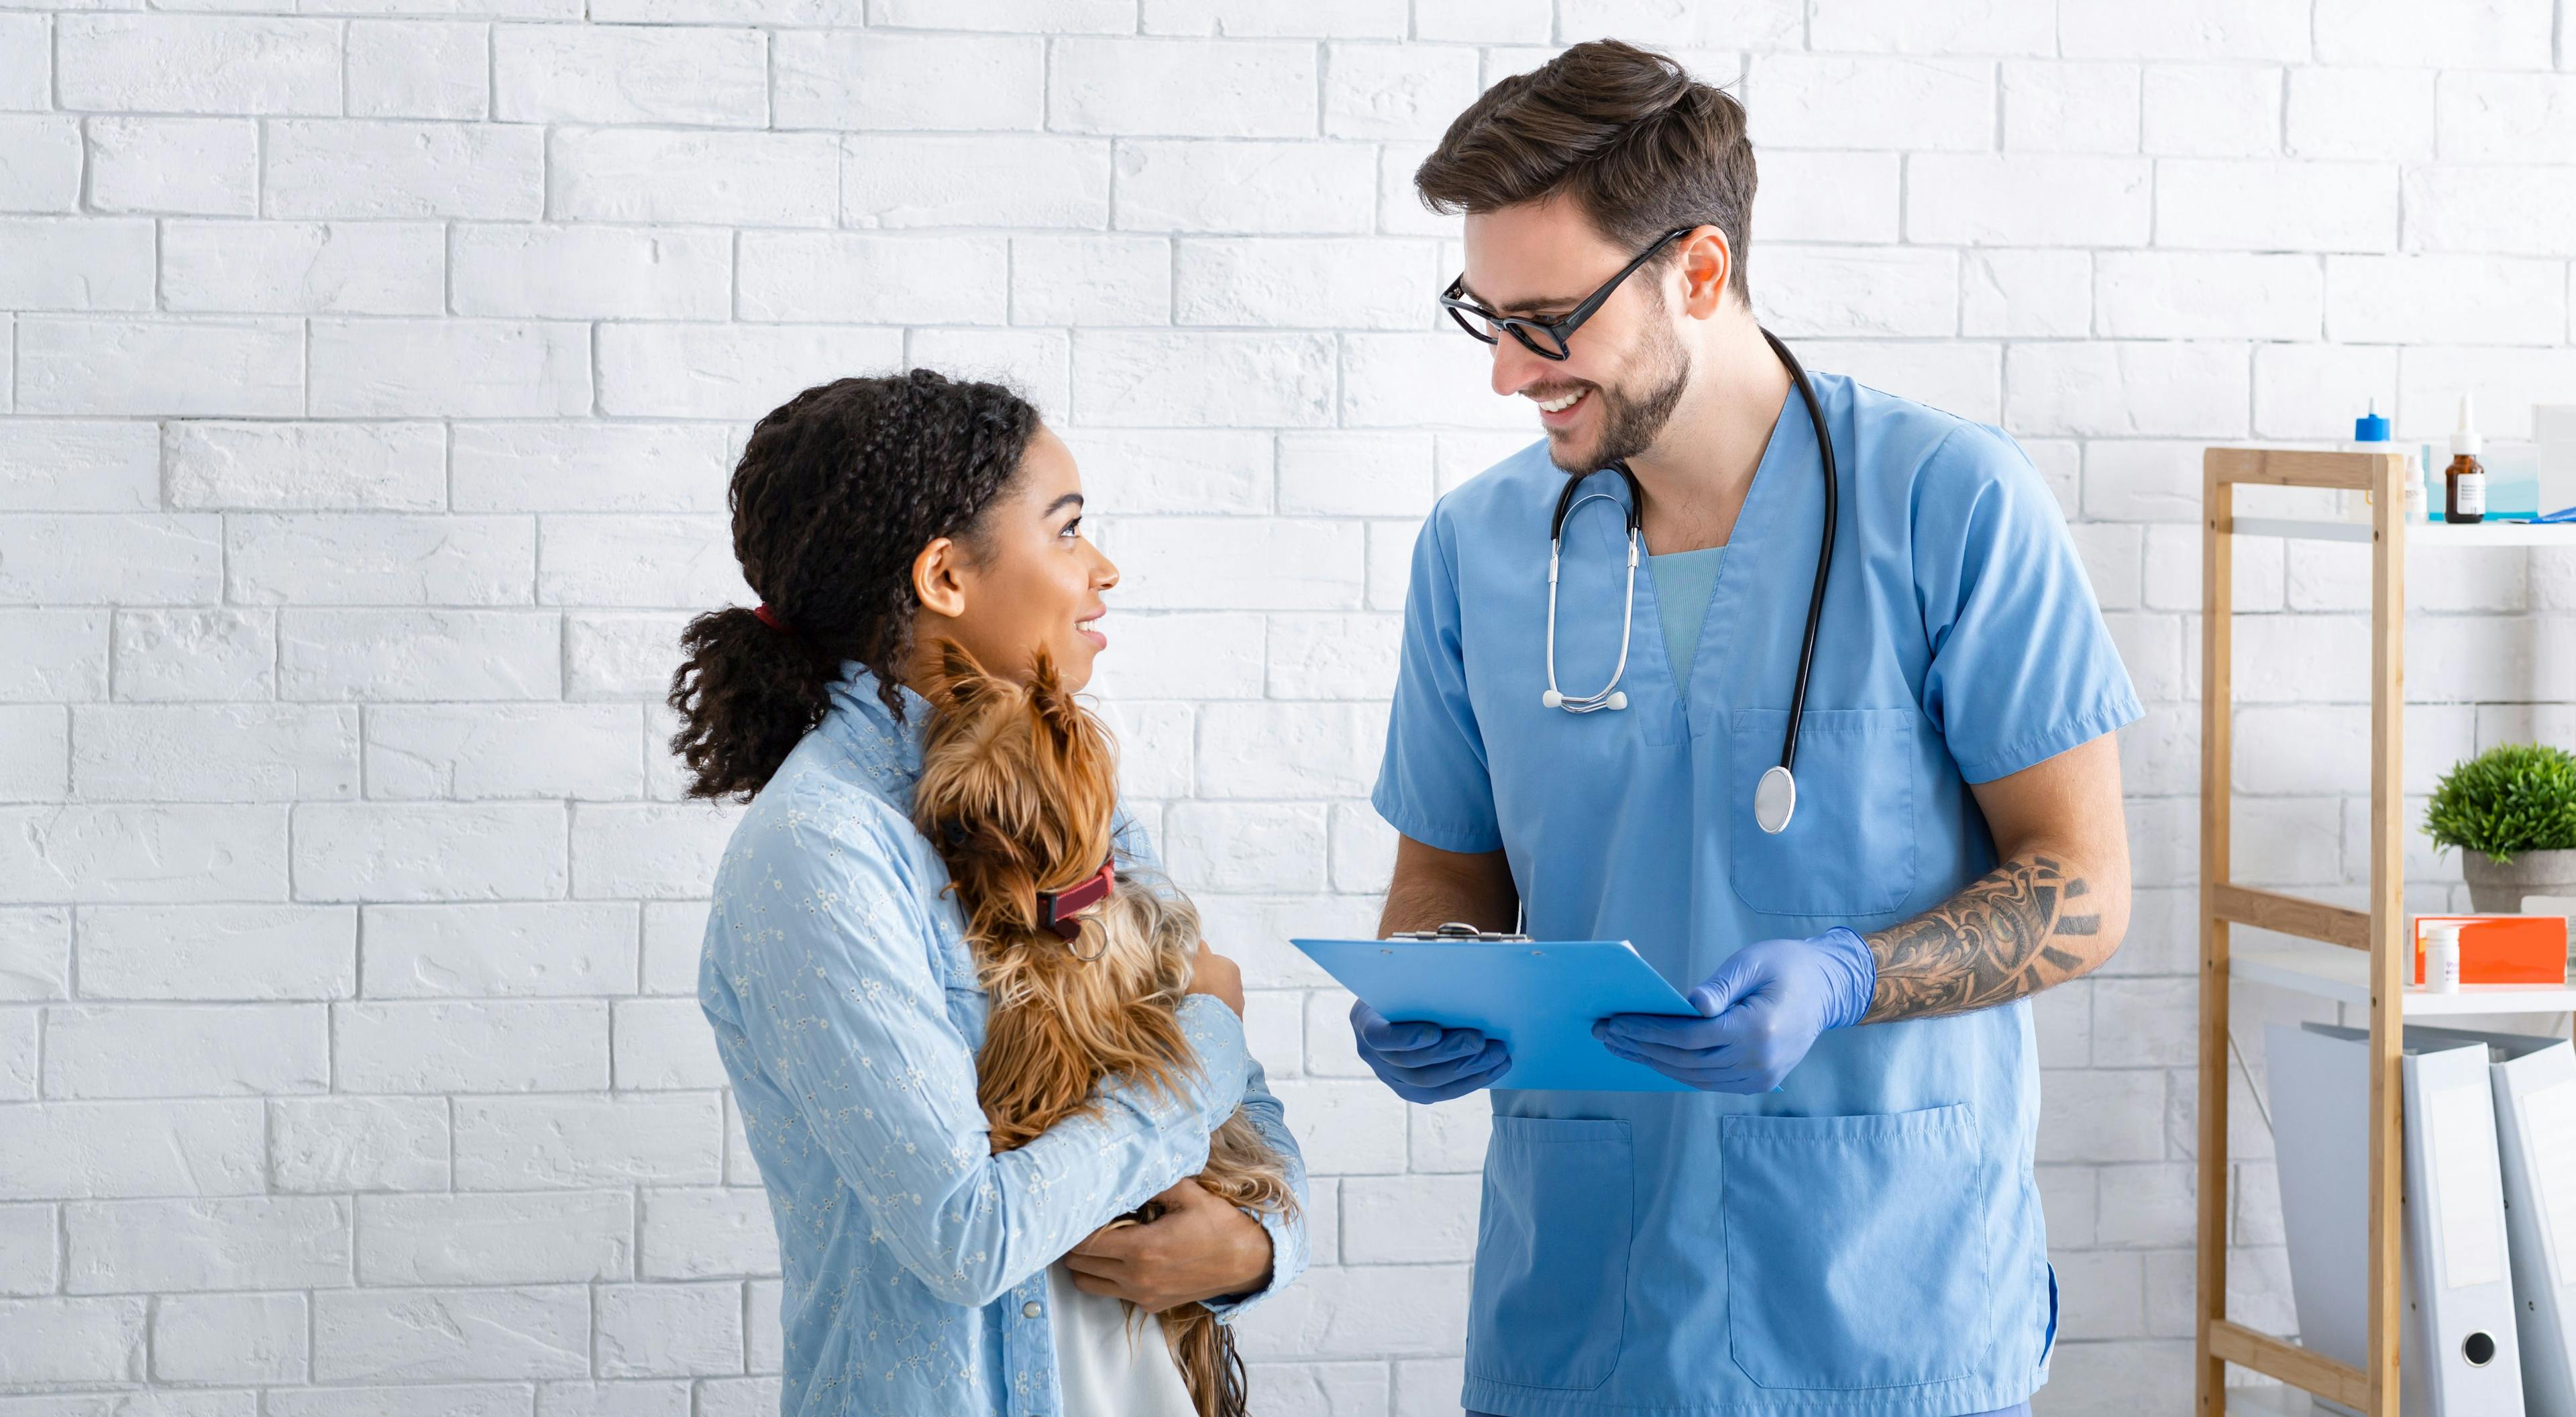 Dental emergencies: Recognizing signs of oral pain in companion animals